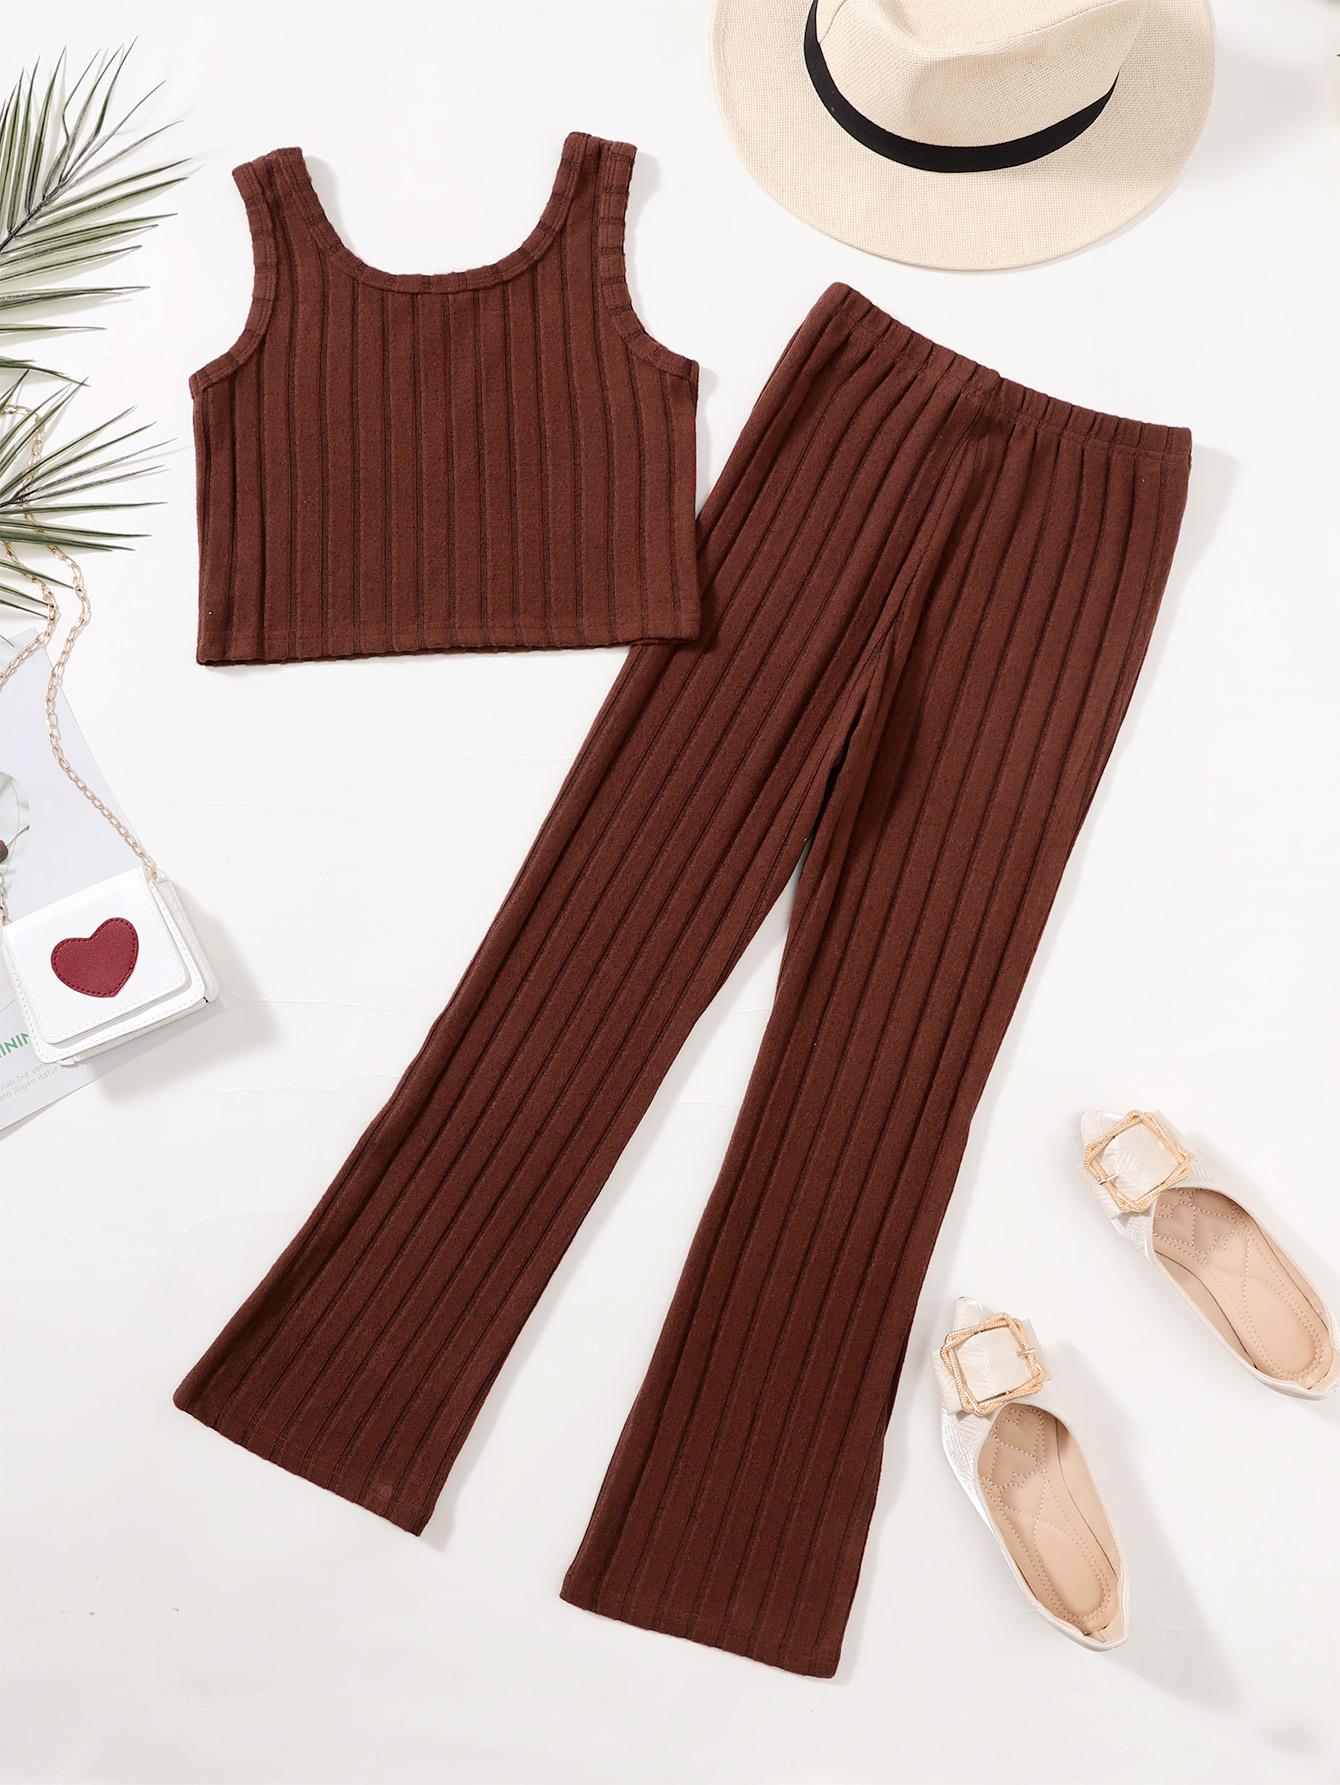 7-14Y Ready Stock Big Girls Summer Rib-knit Outfits Versatile & Classy Sleeveless Top & Skinny Pants Set 2Pcs Clothing From 7Y-14Y Brown Catpapa 462402007